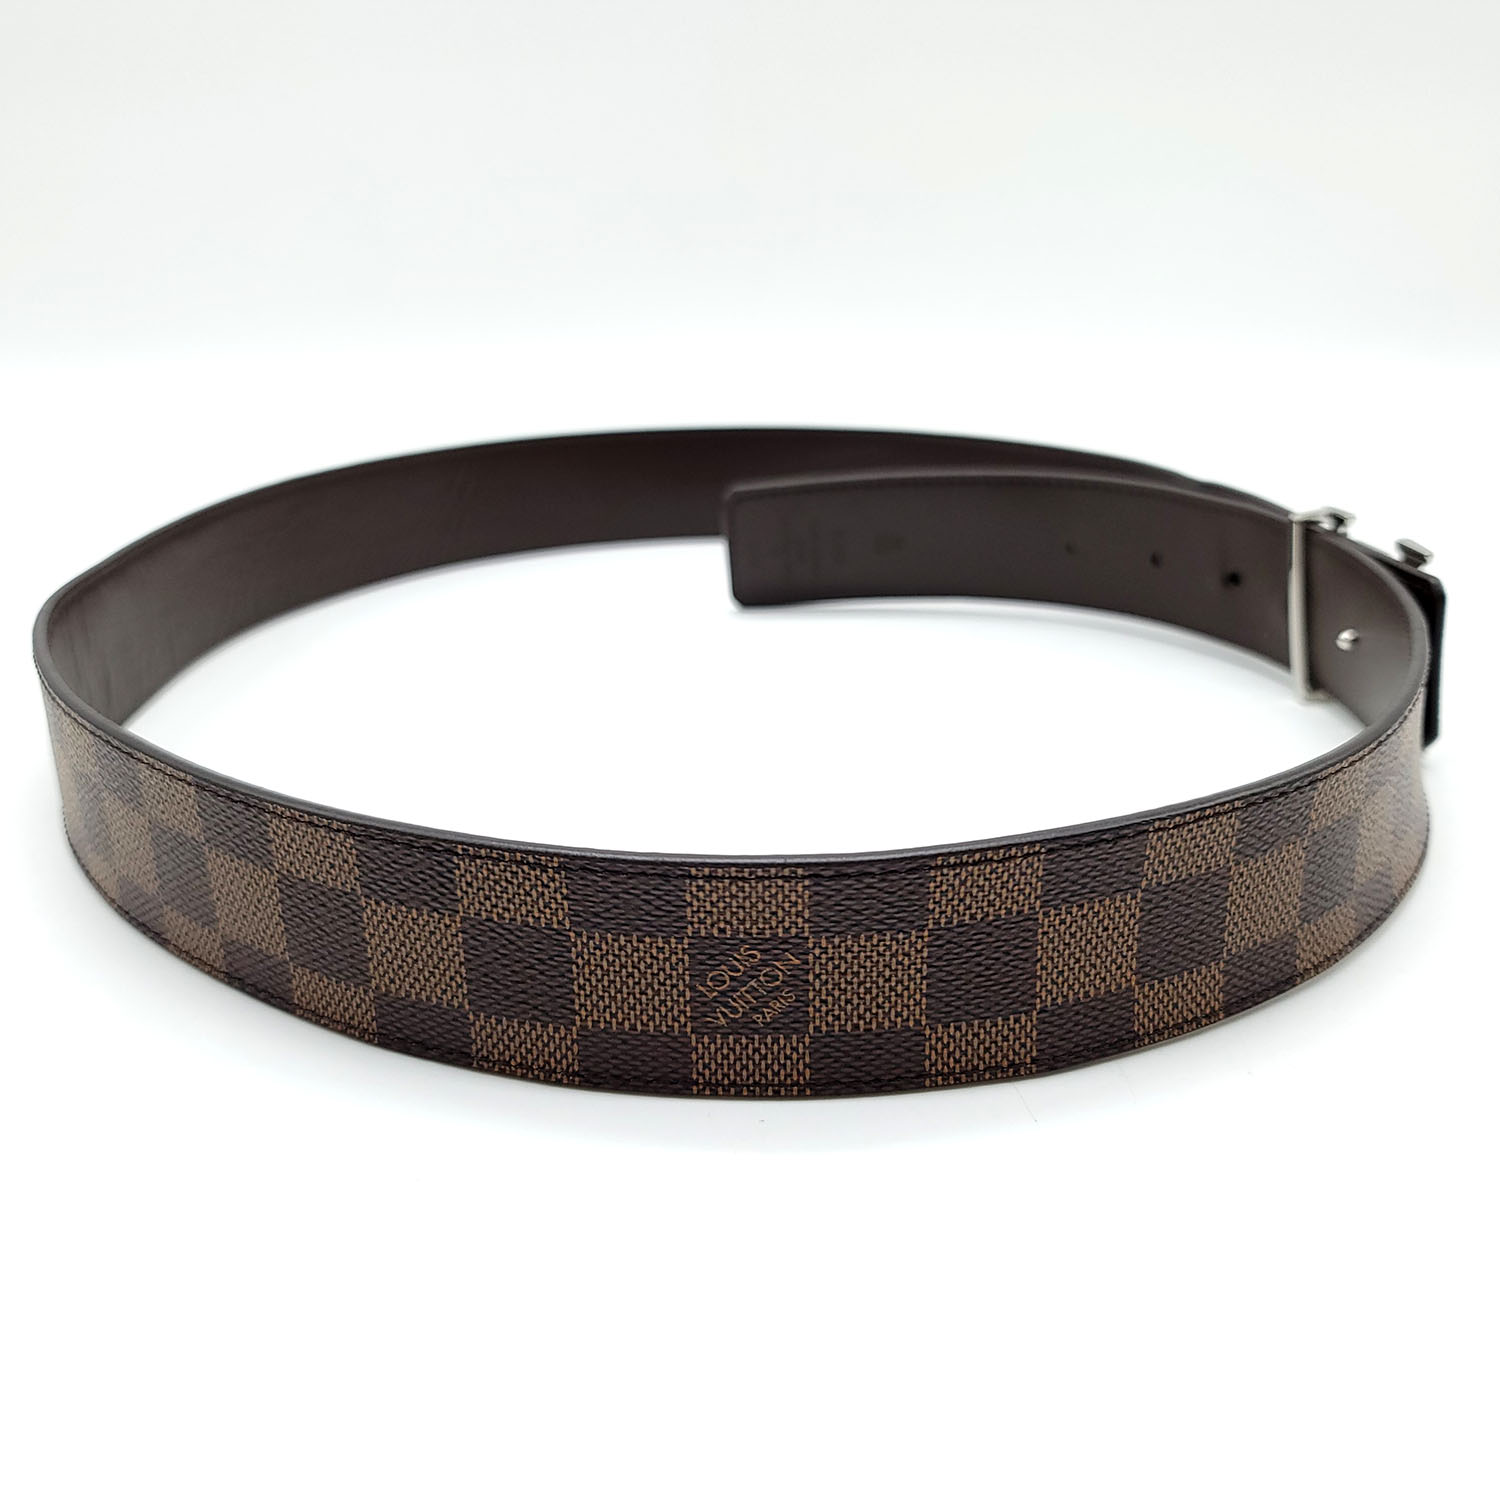 Louis Vuitton LV Initials 40mm Reversible Belt Brown in Leather